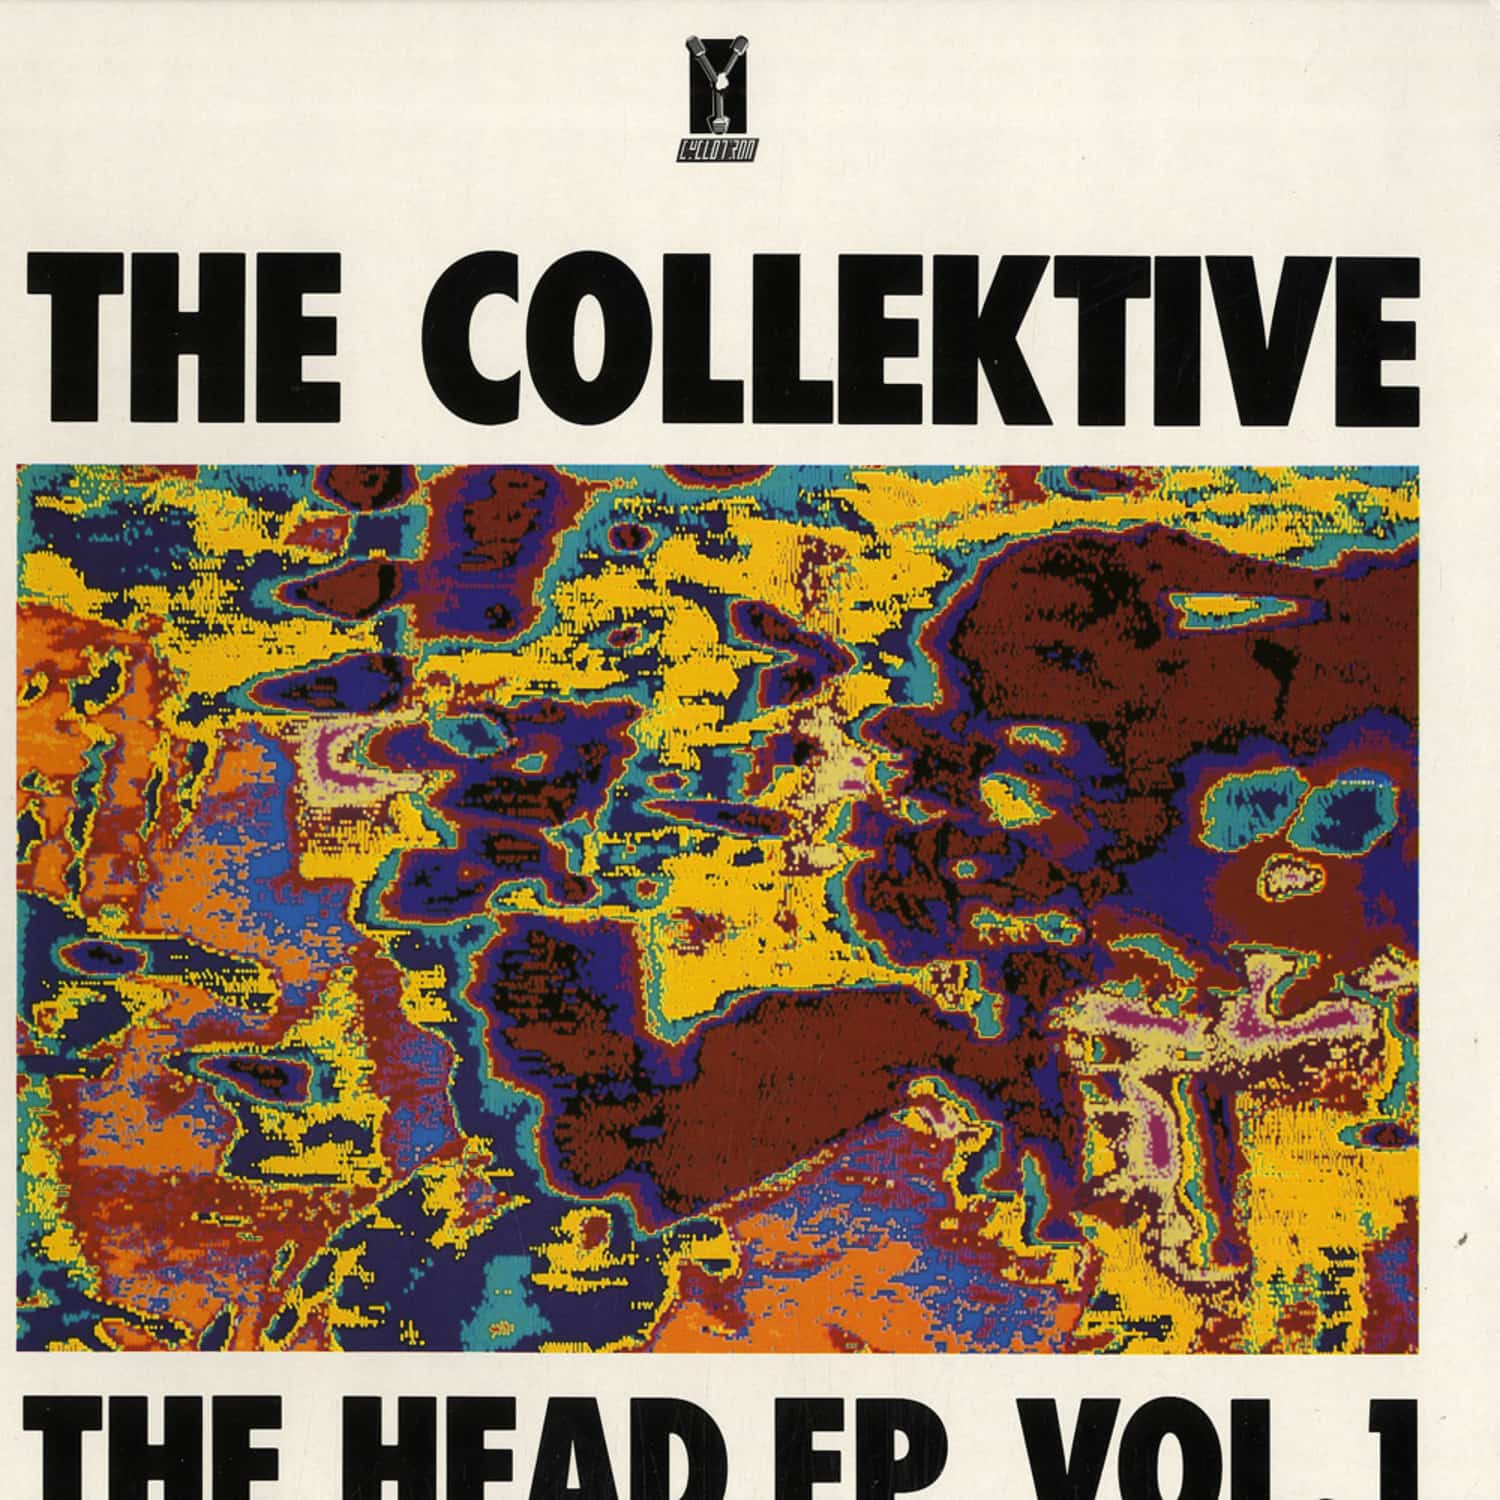 The Collective - THE HEAD EP VOL. 1